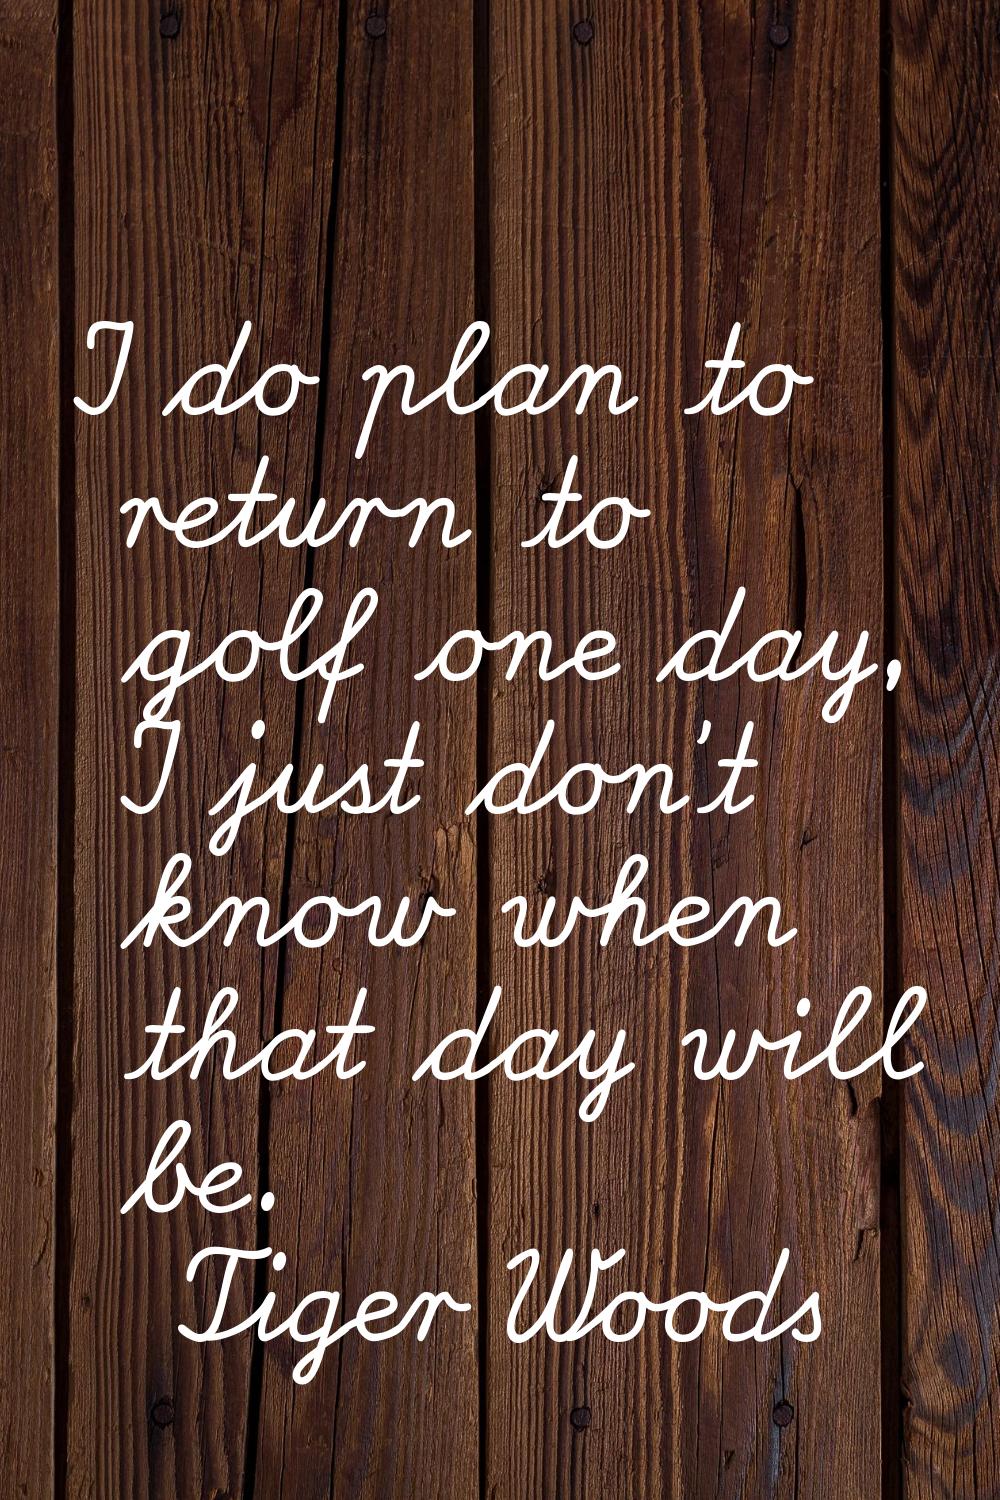 I do plan to return to golf one day, I just don't know when that day will be.